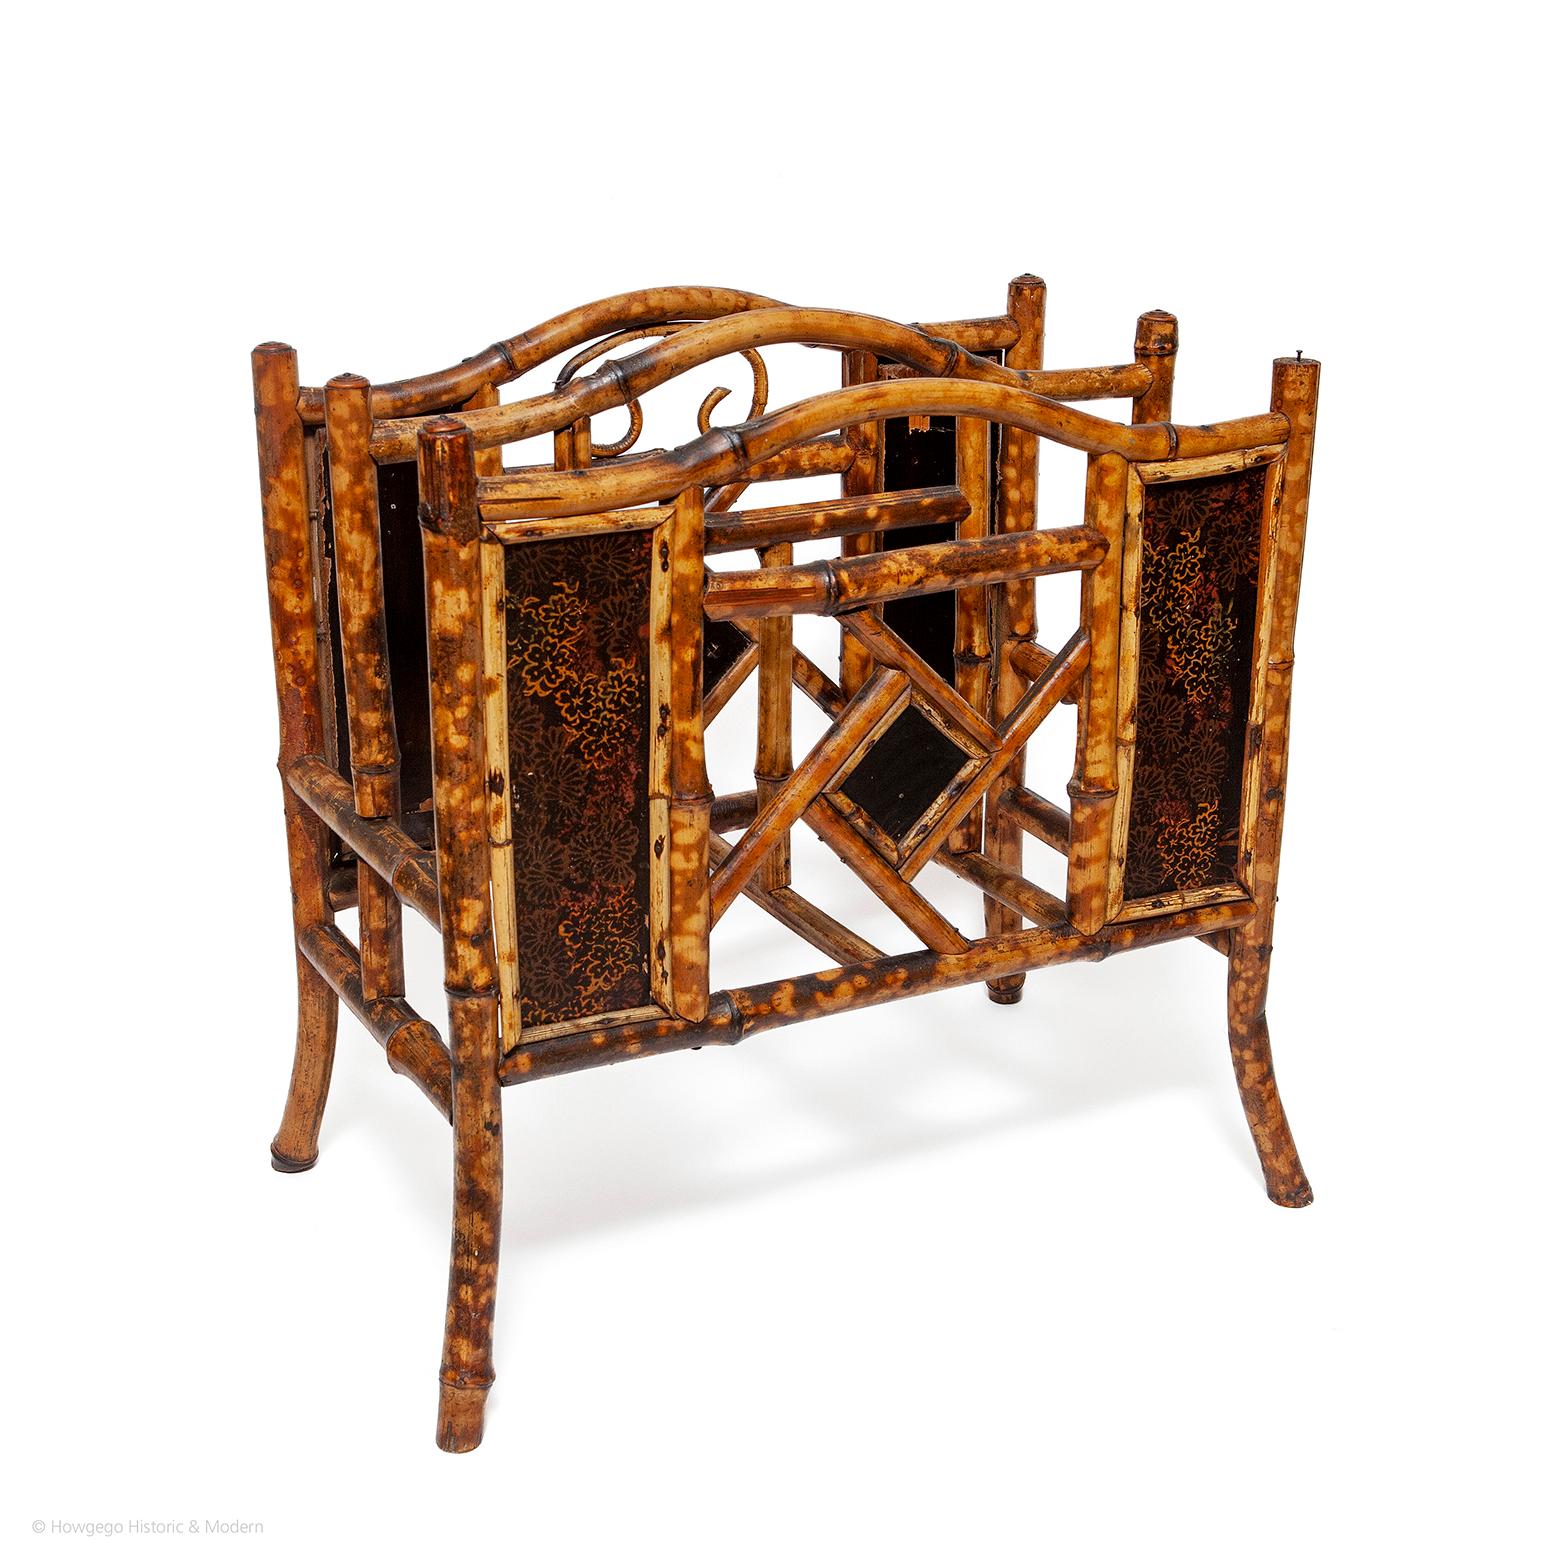 The bamboo frame is painted to simulate tortoishell which you see on the finest pieces. The centre of each side has a fretwork panel with central ebonised plaque and a pair of floral lacquer panels either side, possibly Japanese lacquerwork. Typical